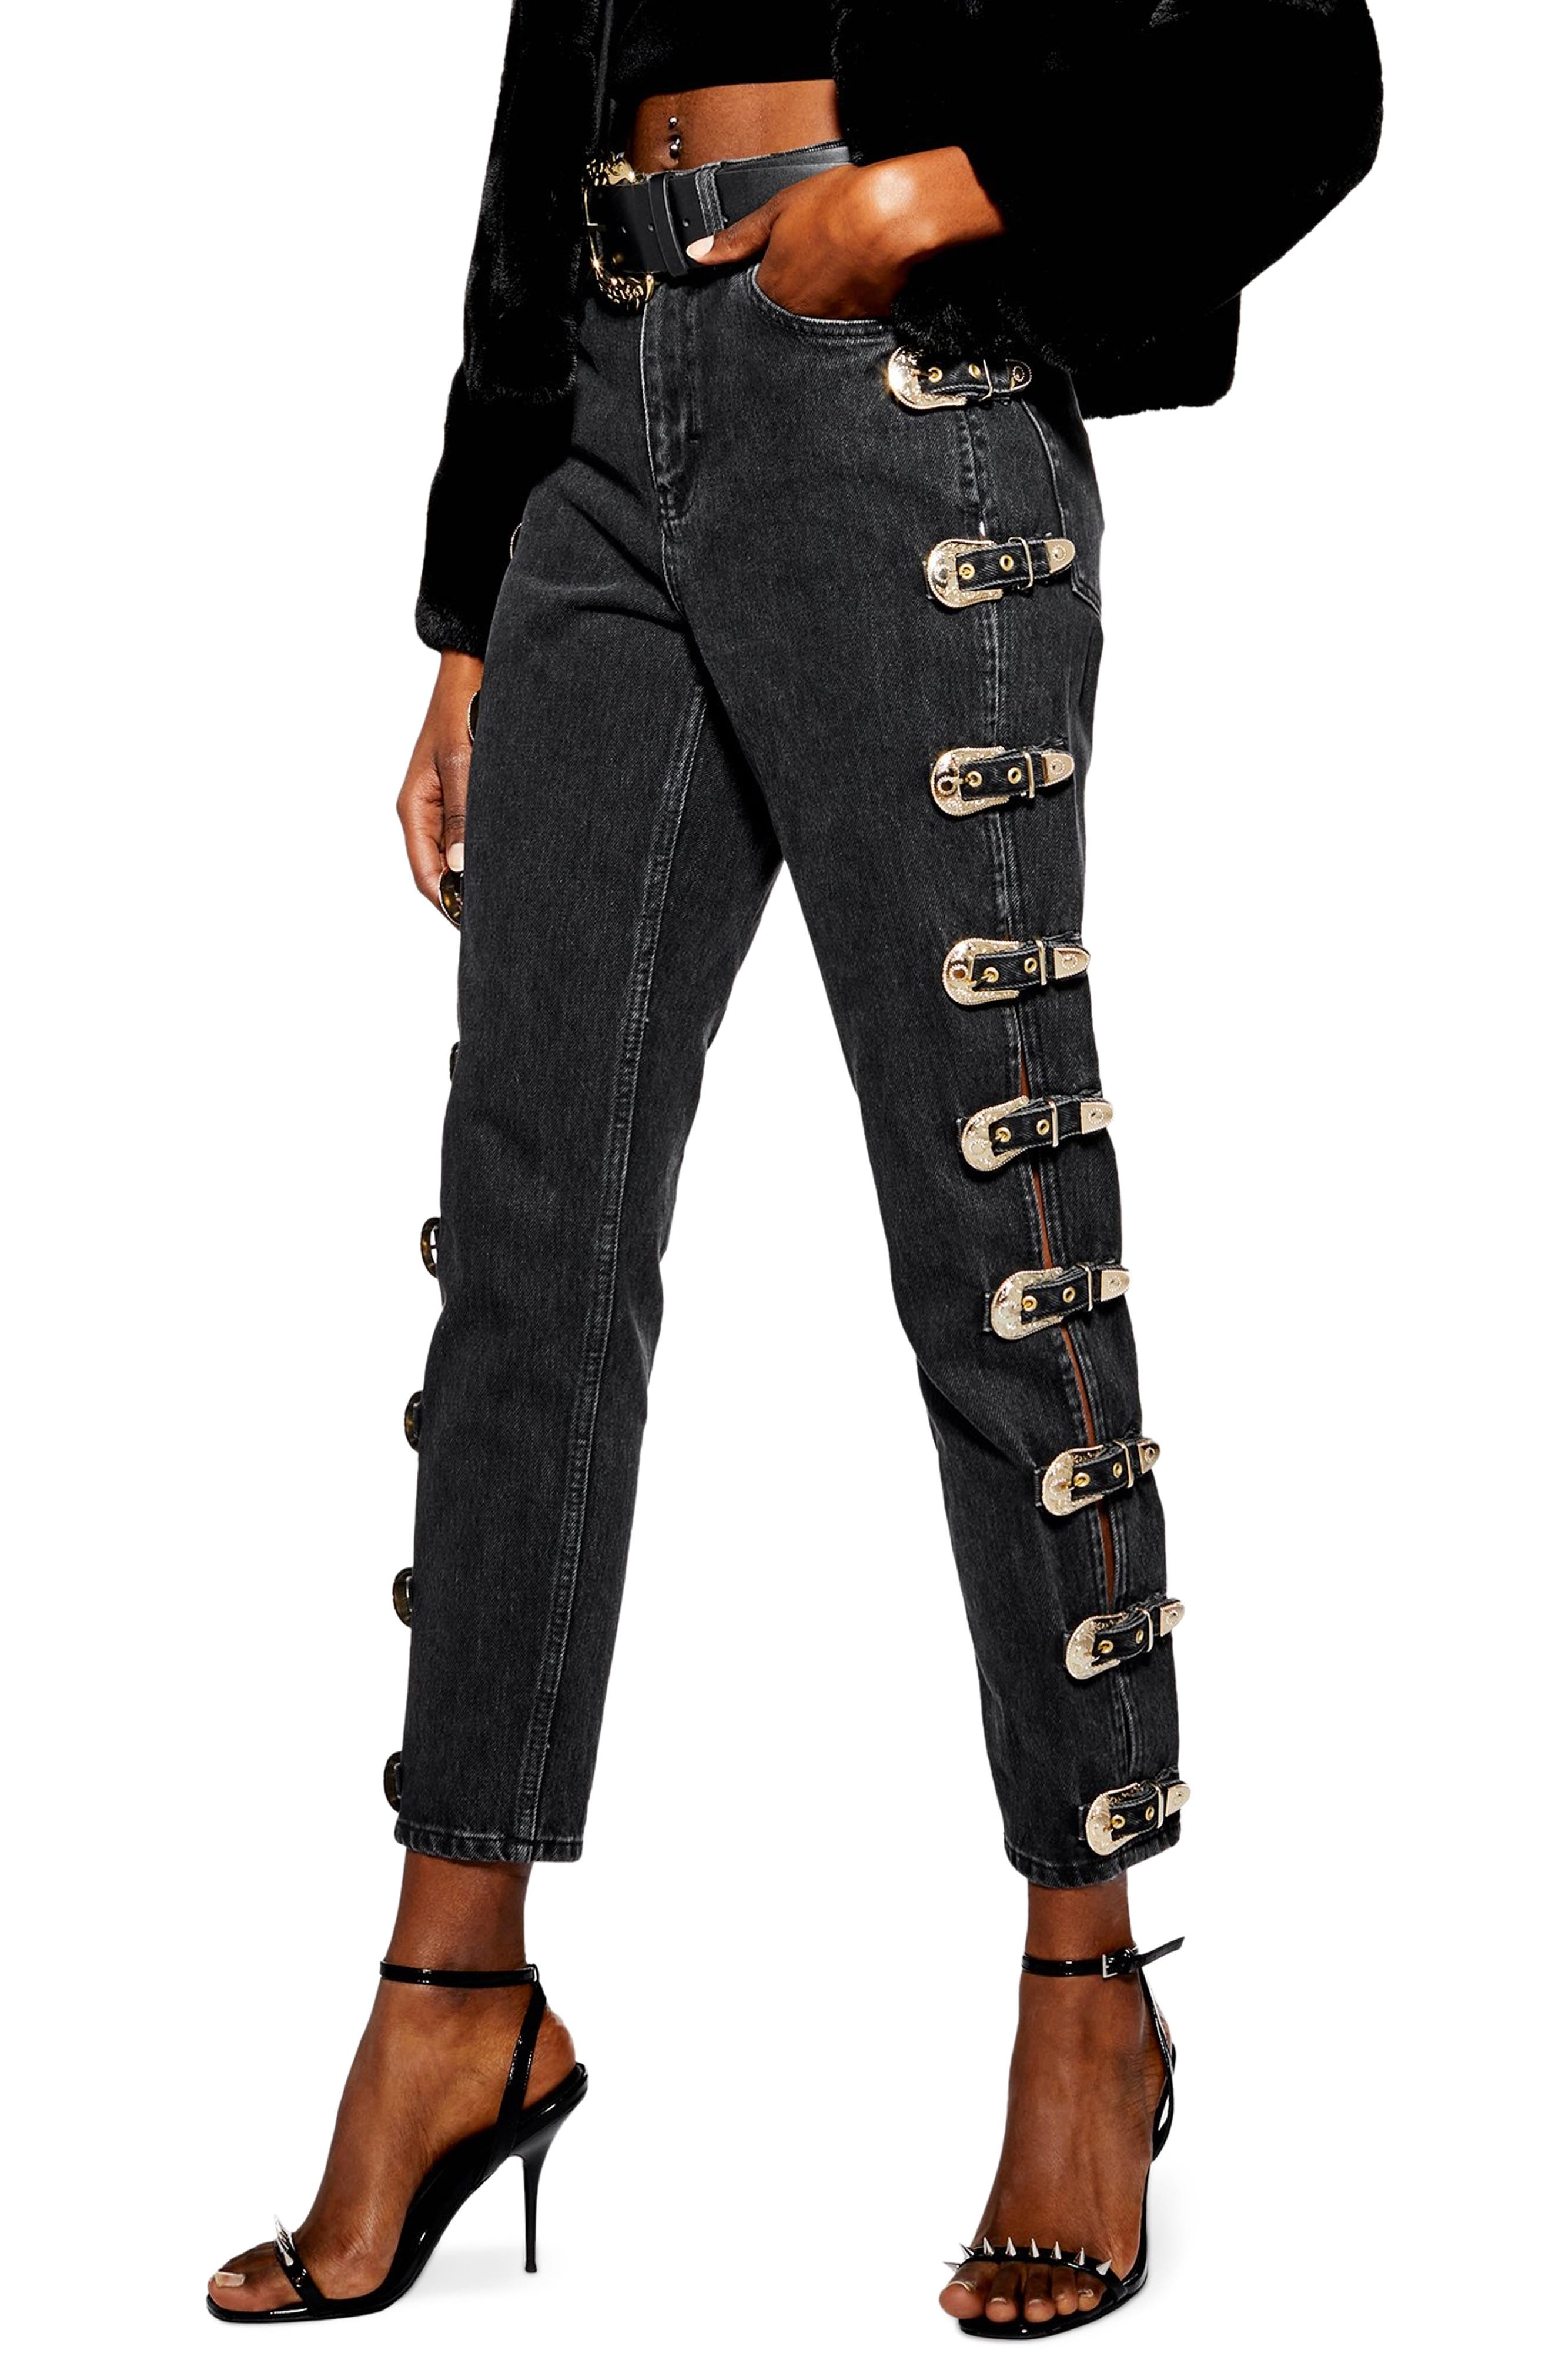 buckle jeans canada